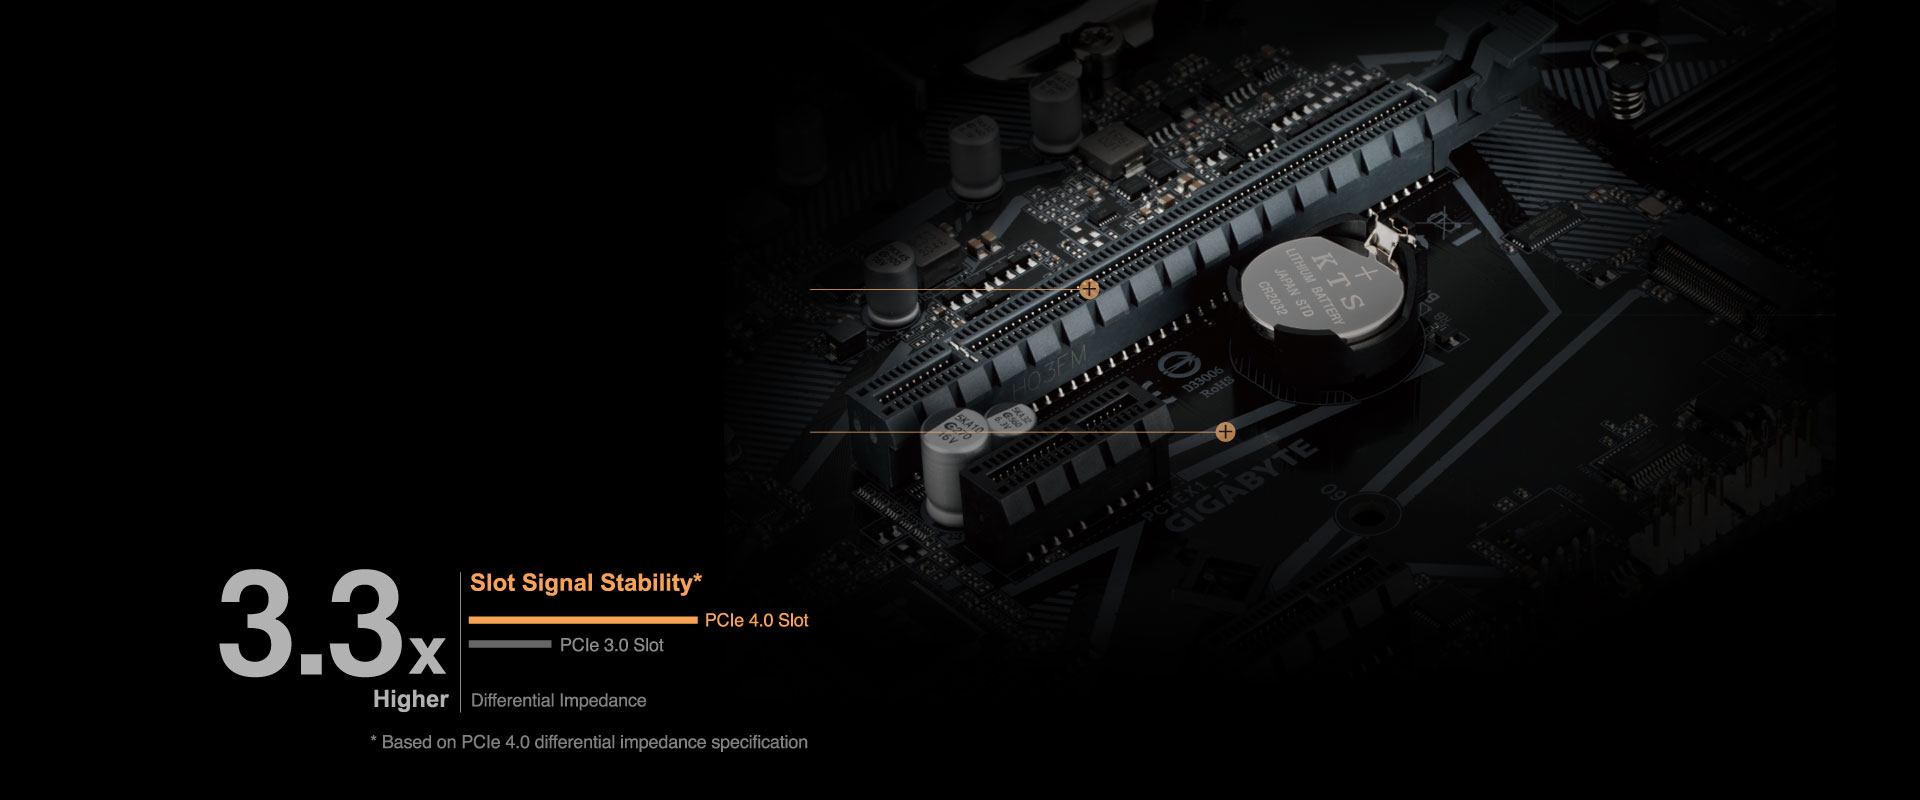 H510M S2H (rev. 1.0) Key Features | Motherboard - GIGABYTE Global